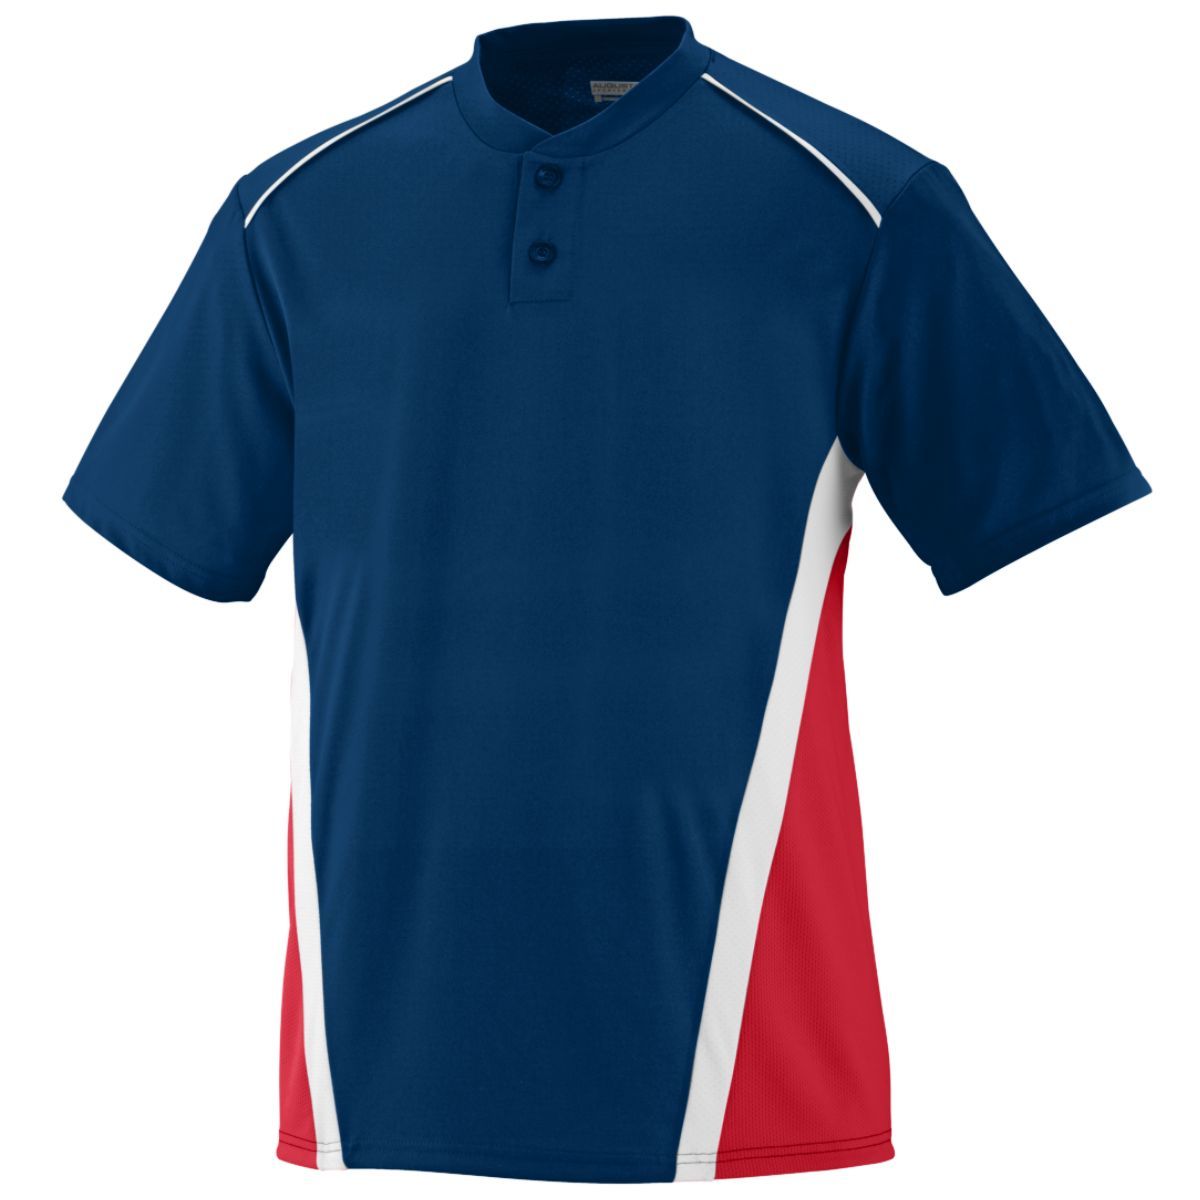 Augusta Sportswear Rbi Jersey in Navy/Red/White  -Part of the Adult, Adult-Jersey, Augusta-Products, Softball, Shirts product lines at KanaleyCreations.com